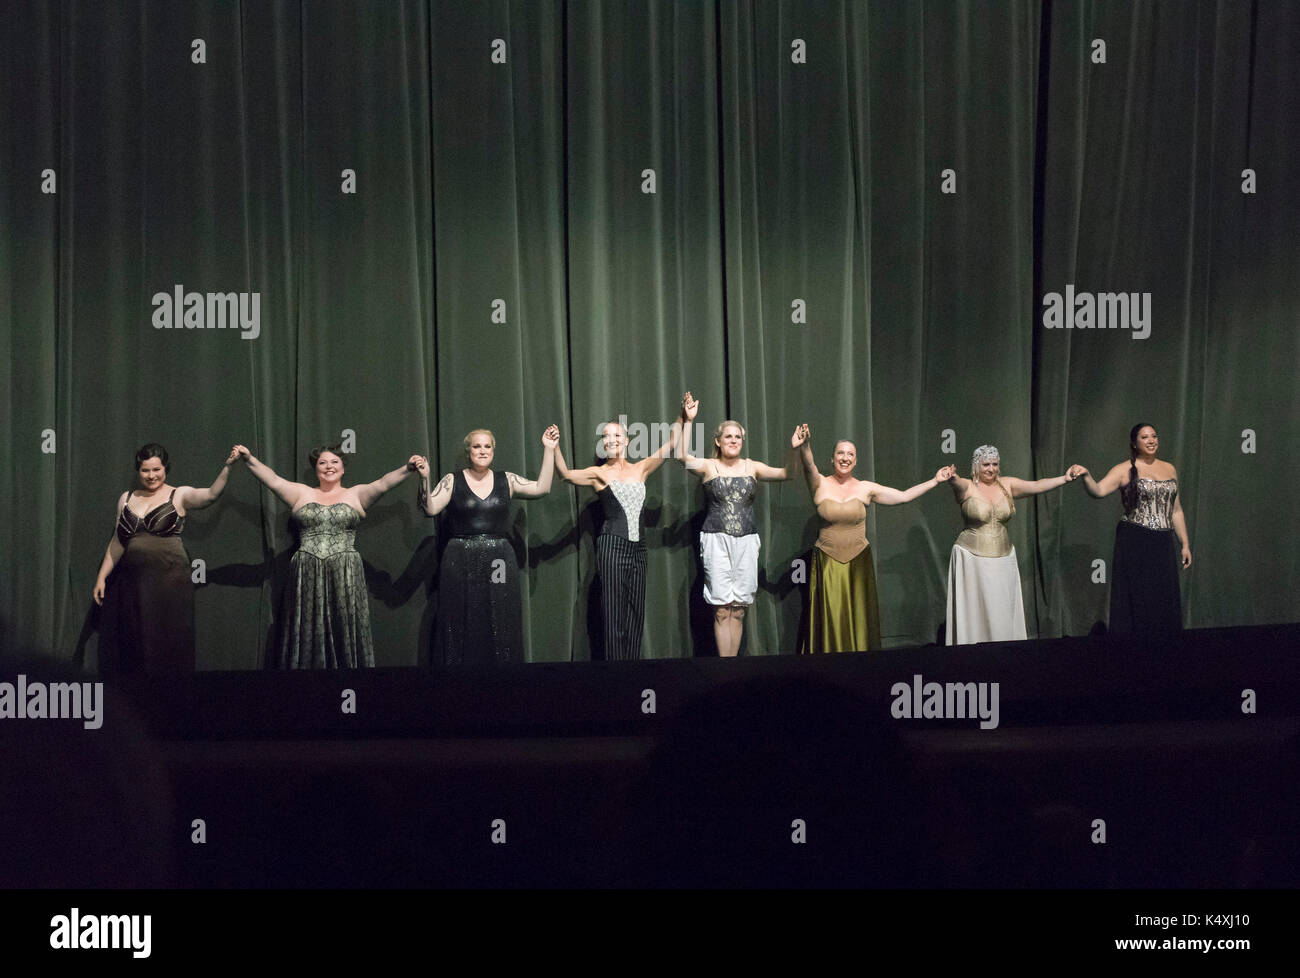 the Valkyries taking a curtain call, Die Walkure, Bayreuth Opera Festival 2017, Bavaria, Germany Stock Photo